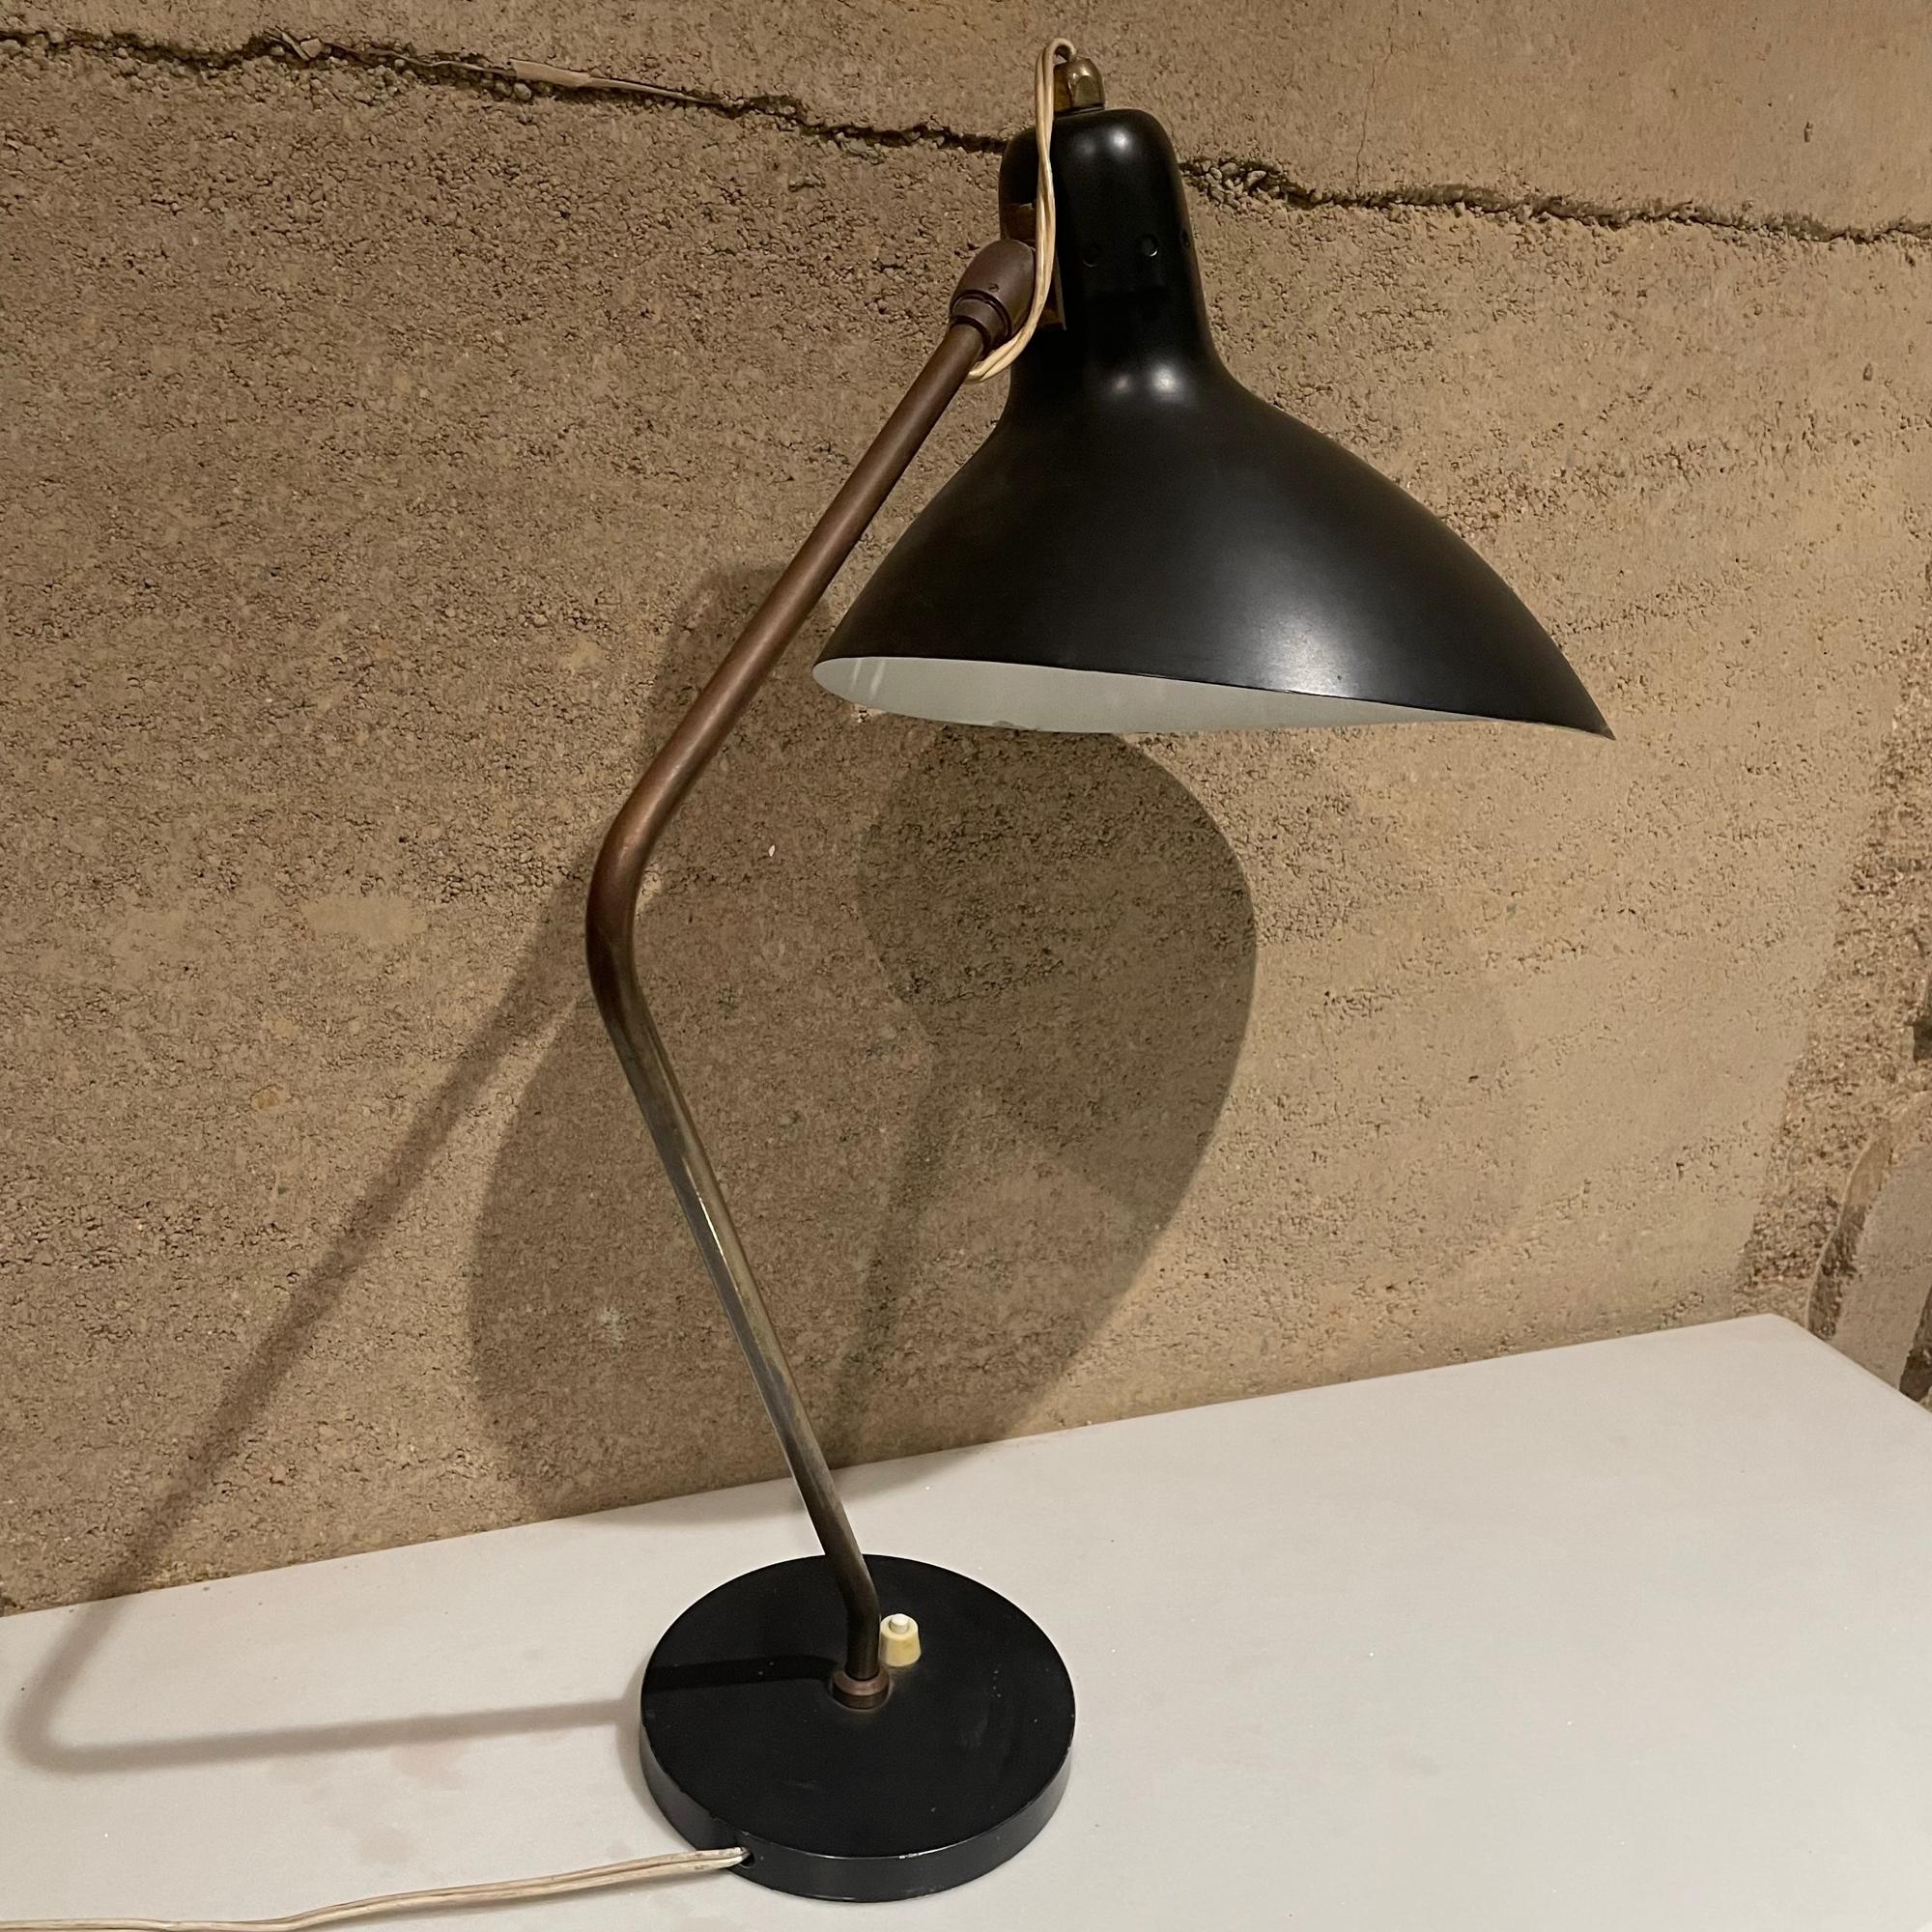 Vittoriano Vigano Sculptural French Table Lamp in Black and Brass France, 1950s For Sale 1